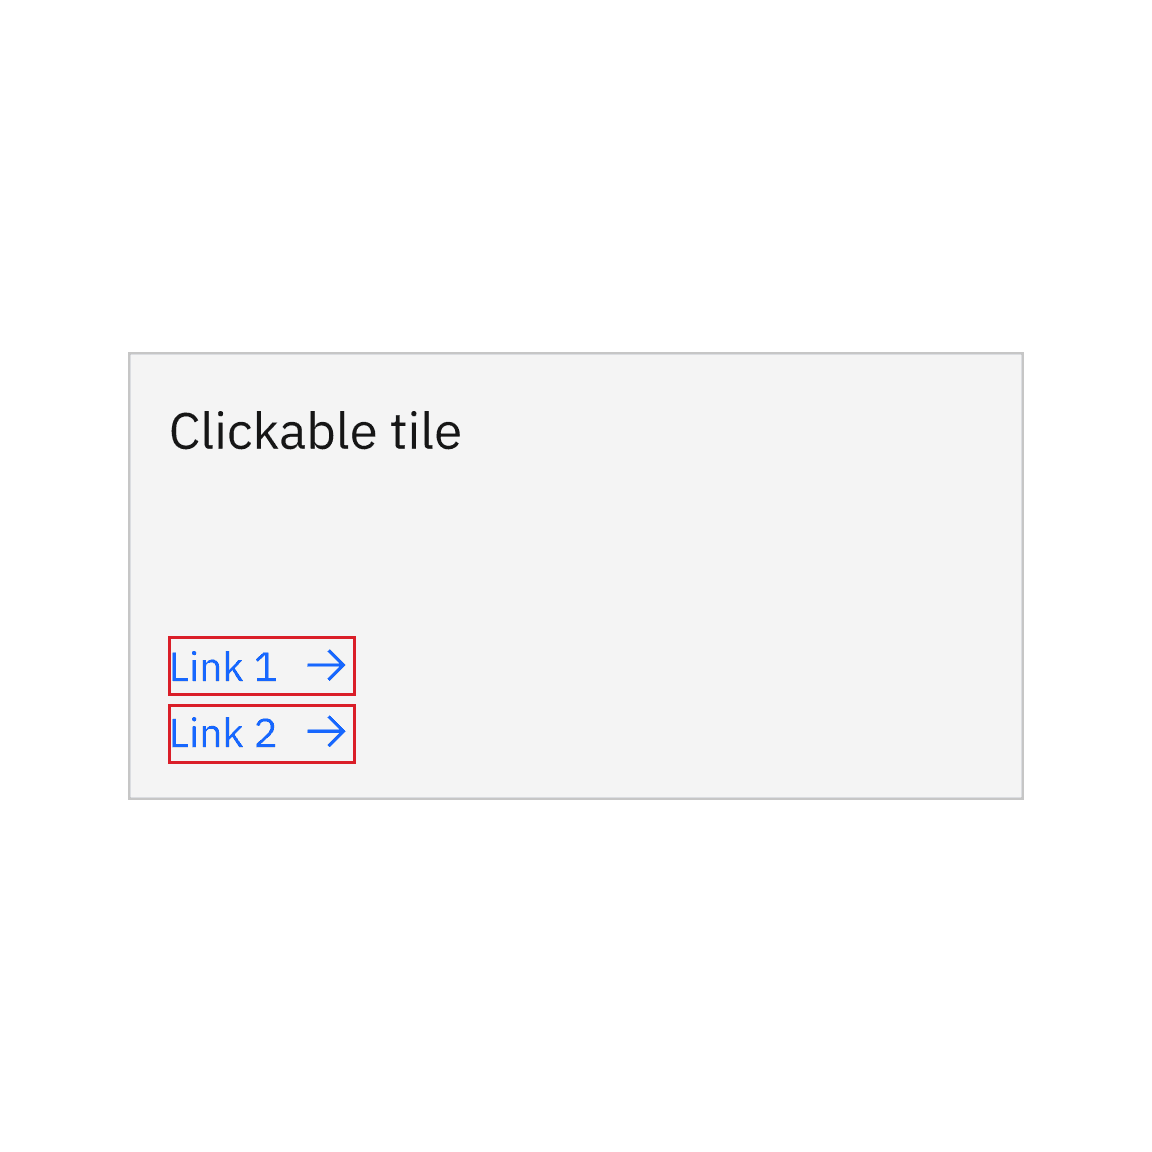 Example of "do not" on clickable tile